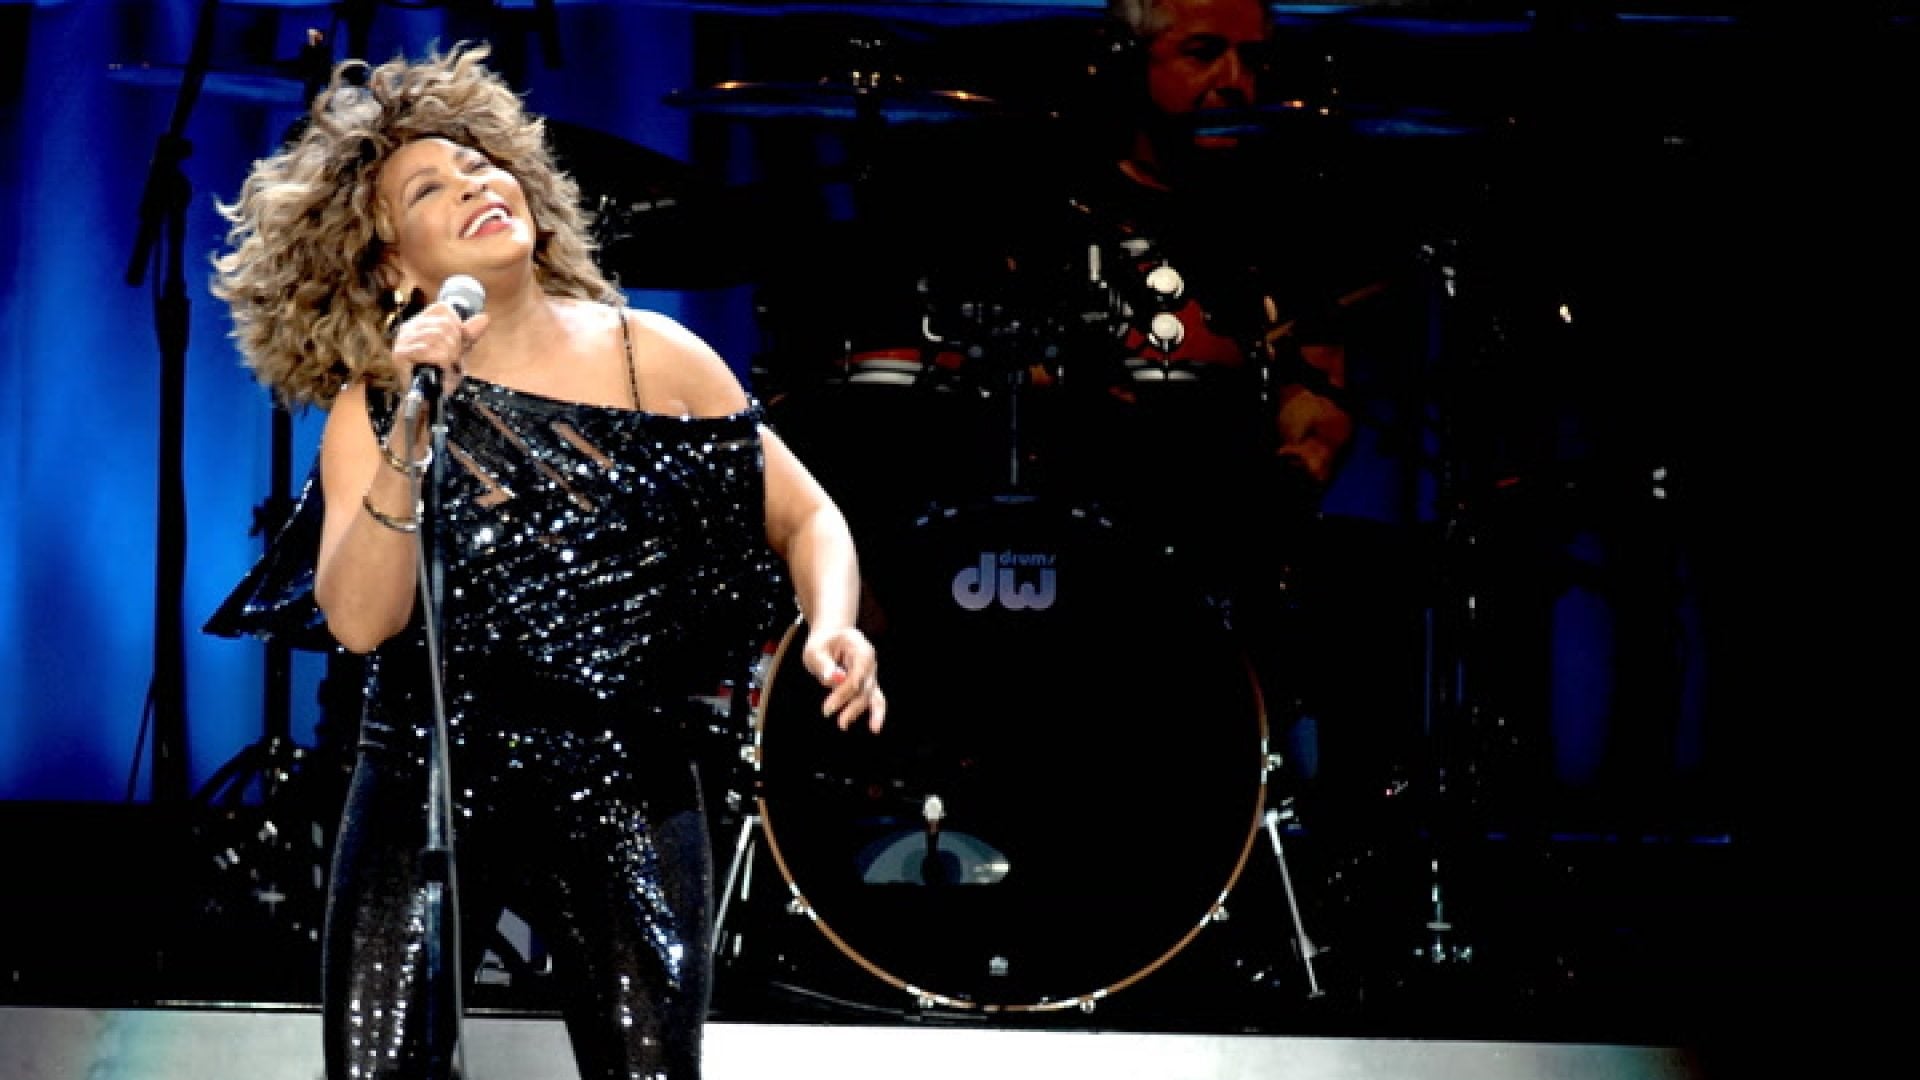 WATCH: A Tribute To Tina Turner